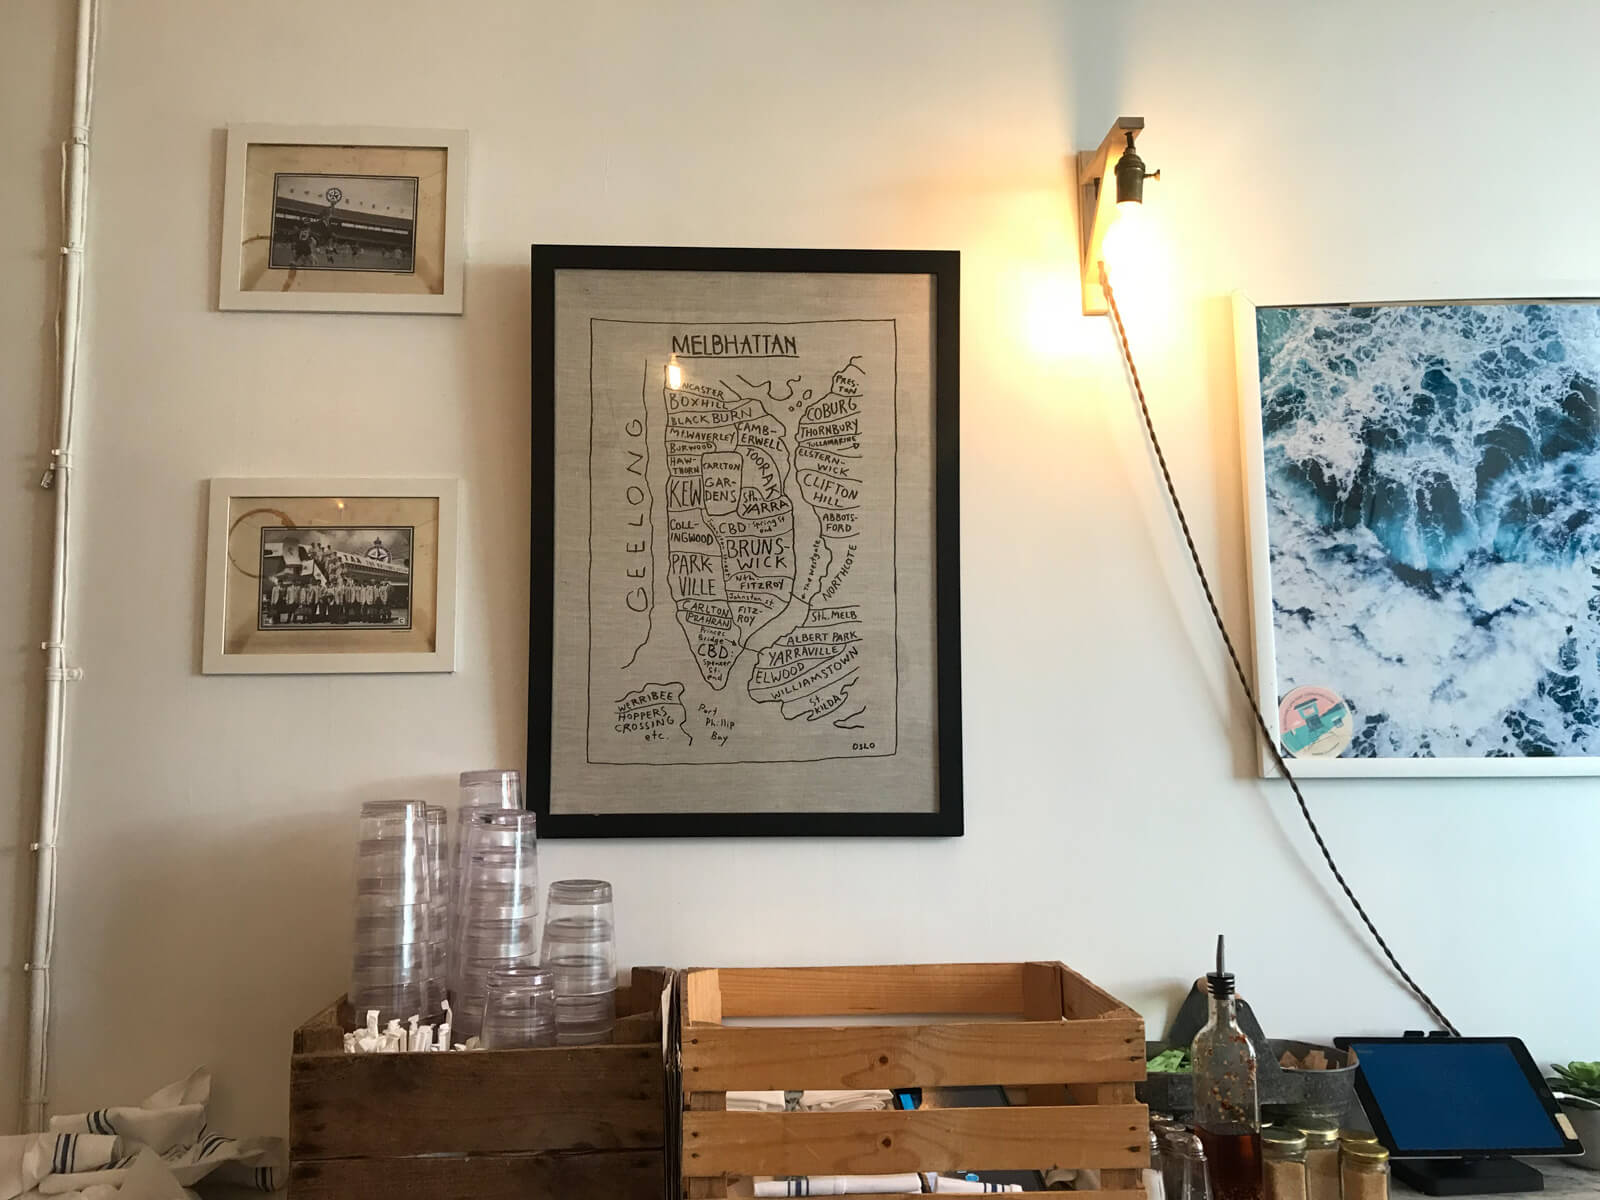 The interior decor of a cafe, with black-and-white photographs on the wall and a piece of drawn artwork titled “Melbhattan”, with outlines and labels resembling a map of a fictitious area